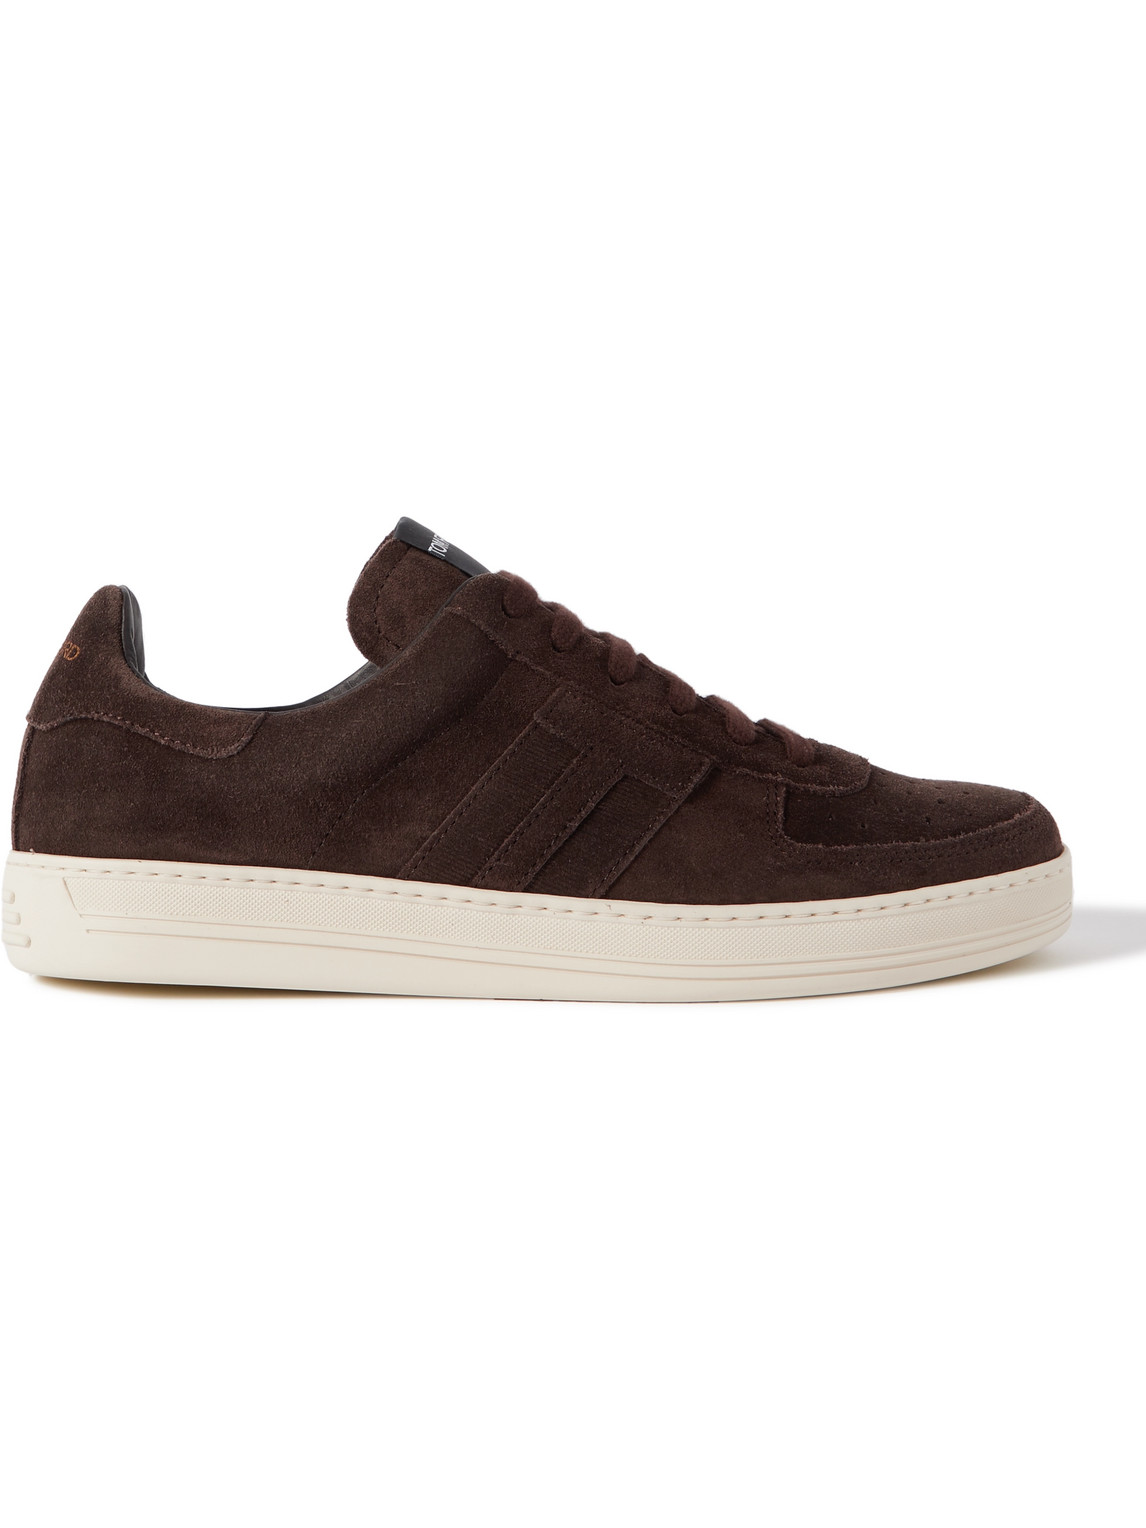 TOM FORD RADCLIFFE SUEDE SNEAKERS